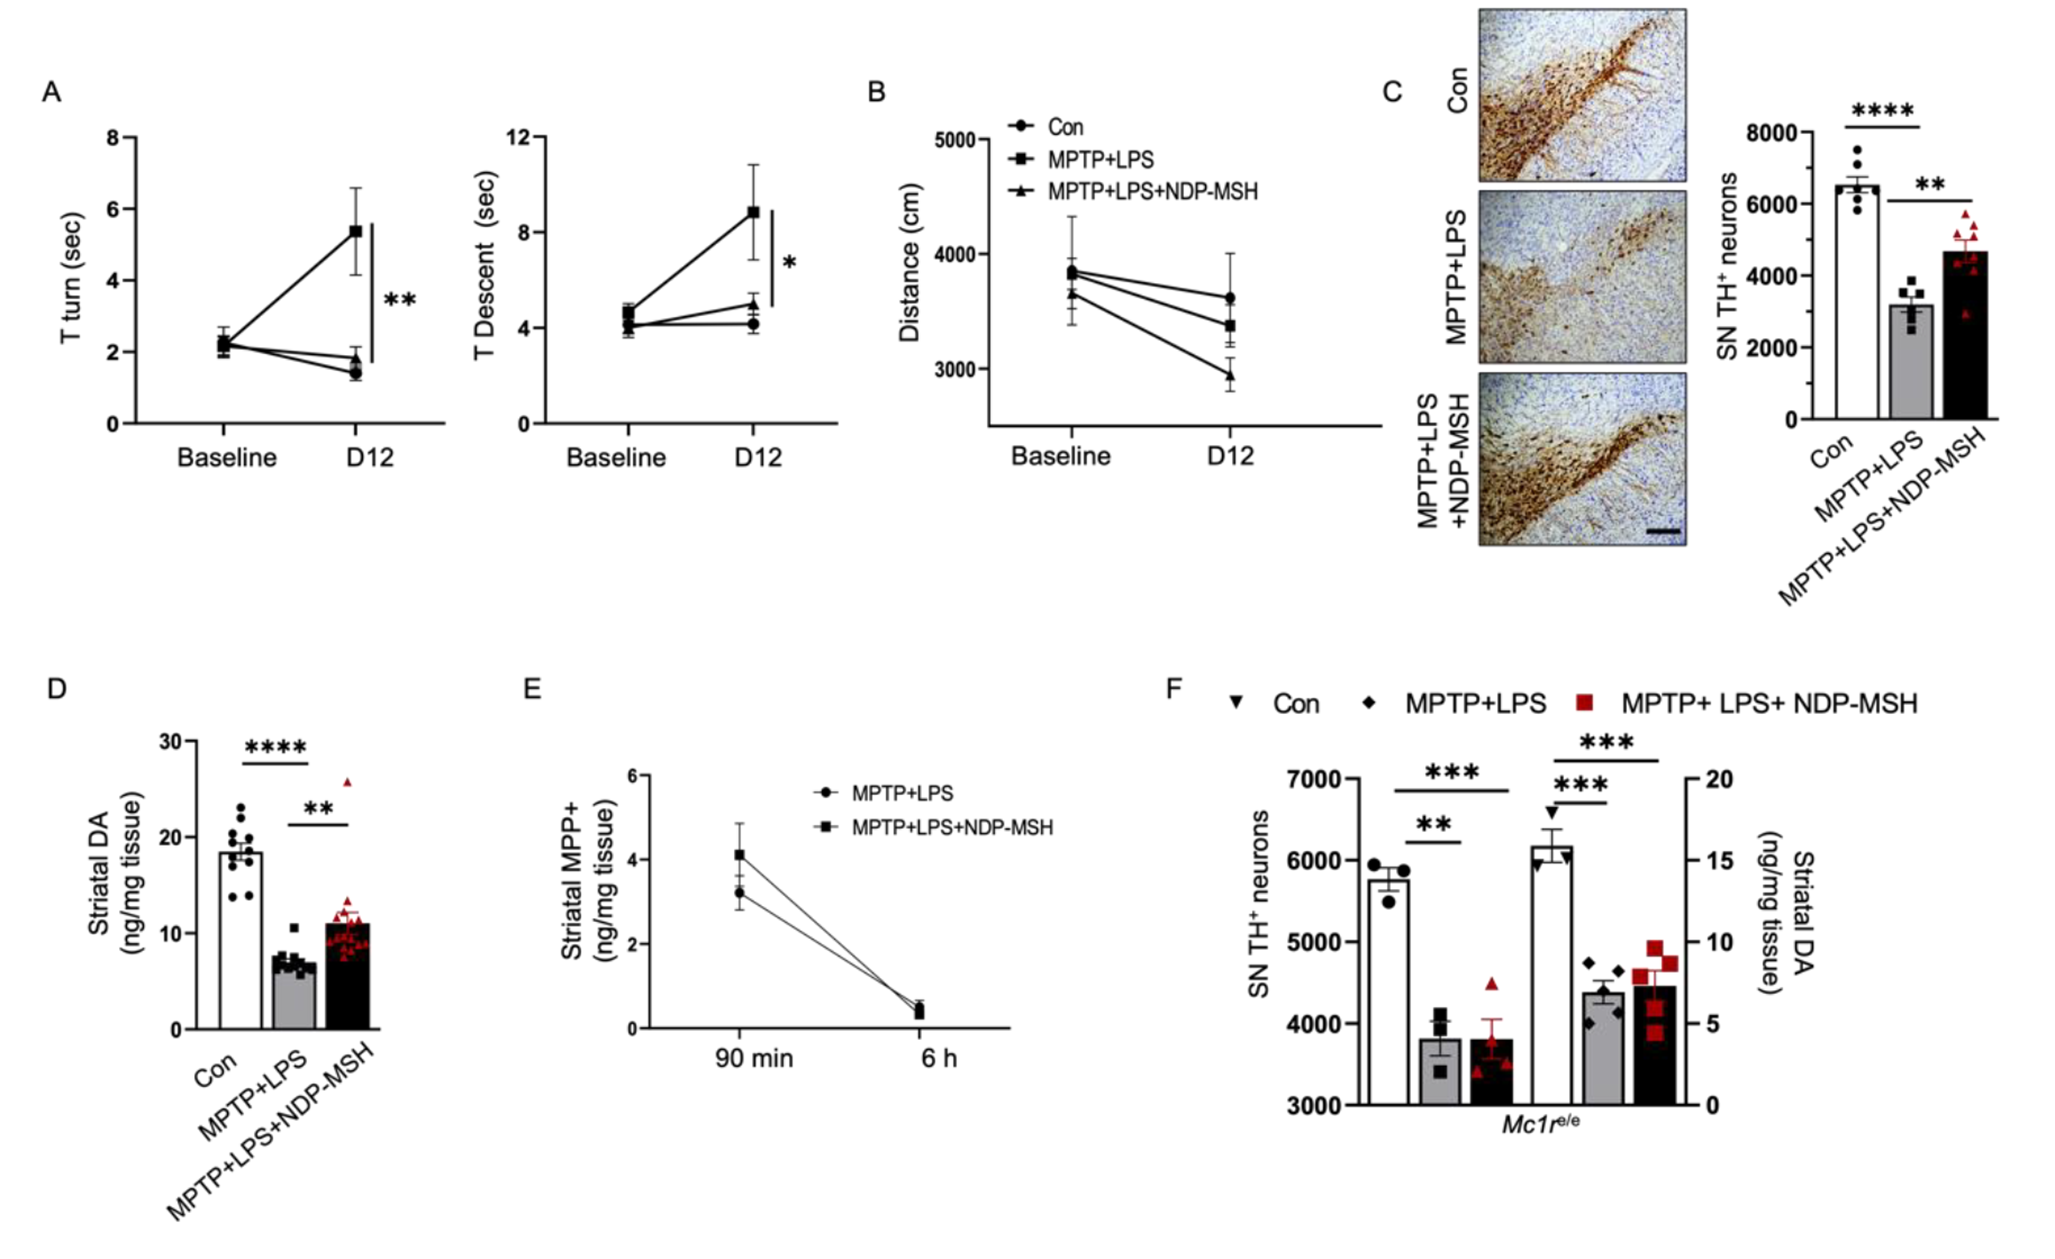 Peripheral MC1R Activation Modulates Immune Responses and is Neuroprotective in a Mouse Model of Parkinson’s Disease